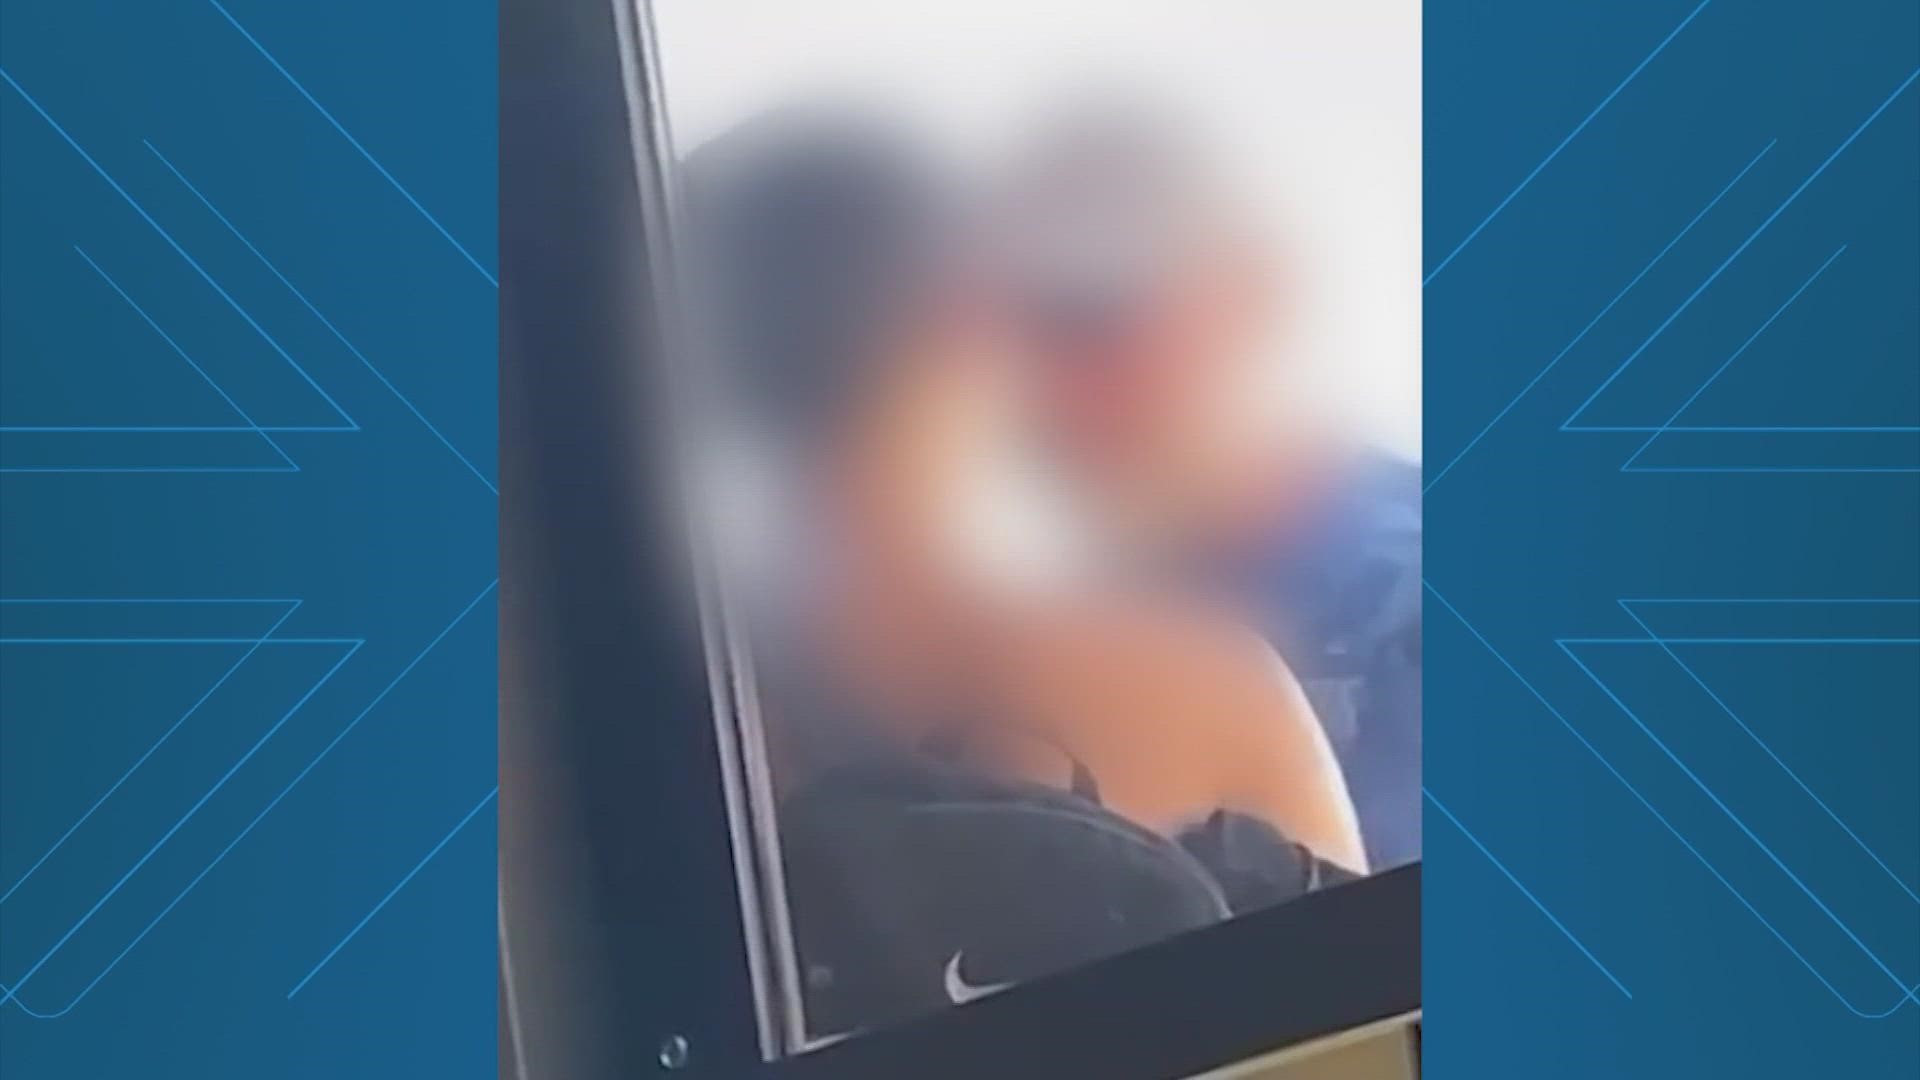 School officials have not confirmed what led to the altercation but released a statement saying they are aware of the video and have launched an investigation.